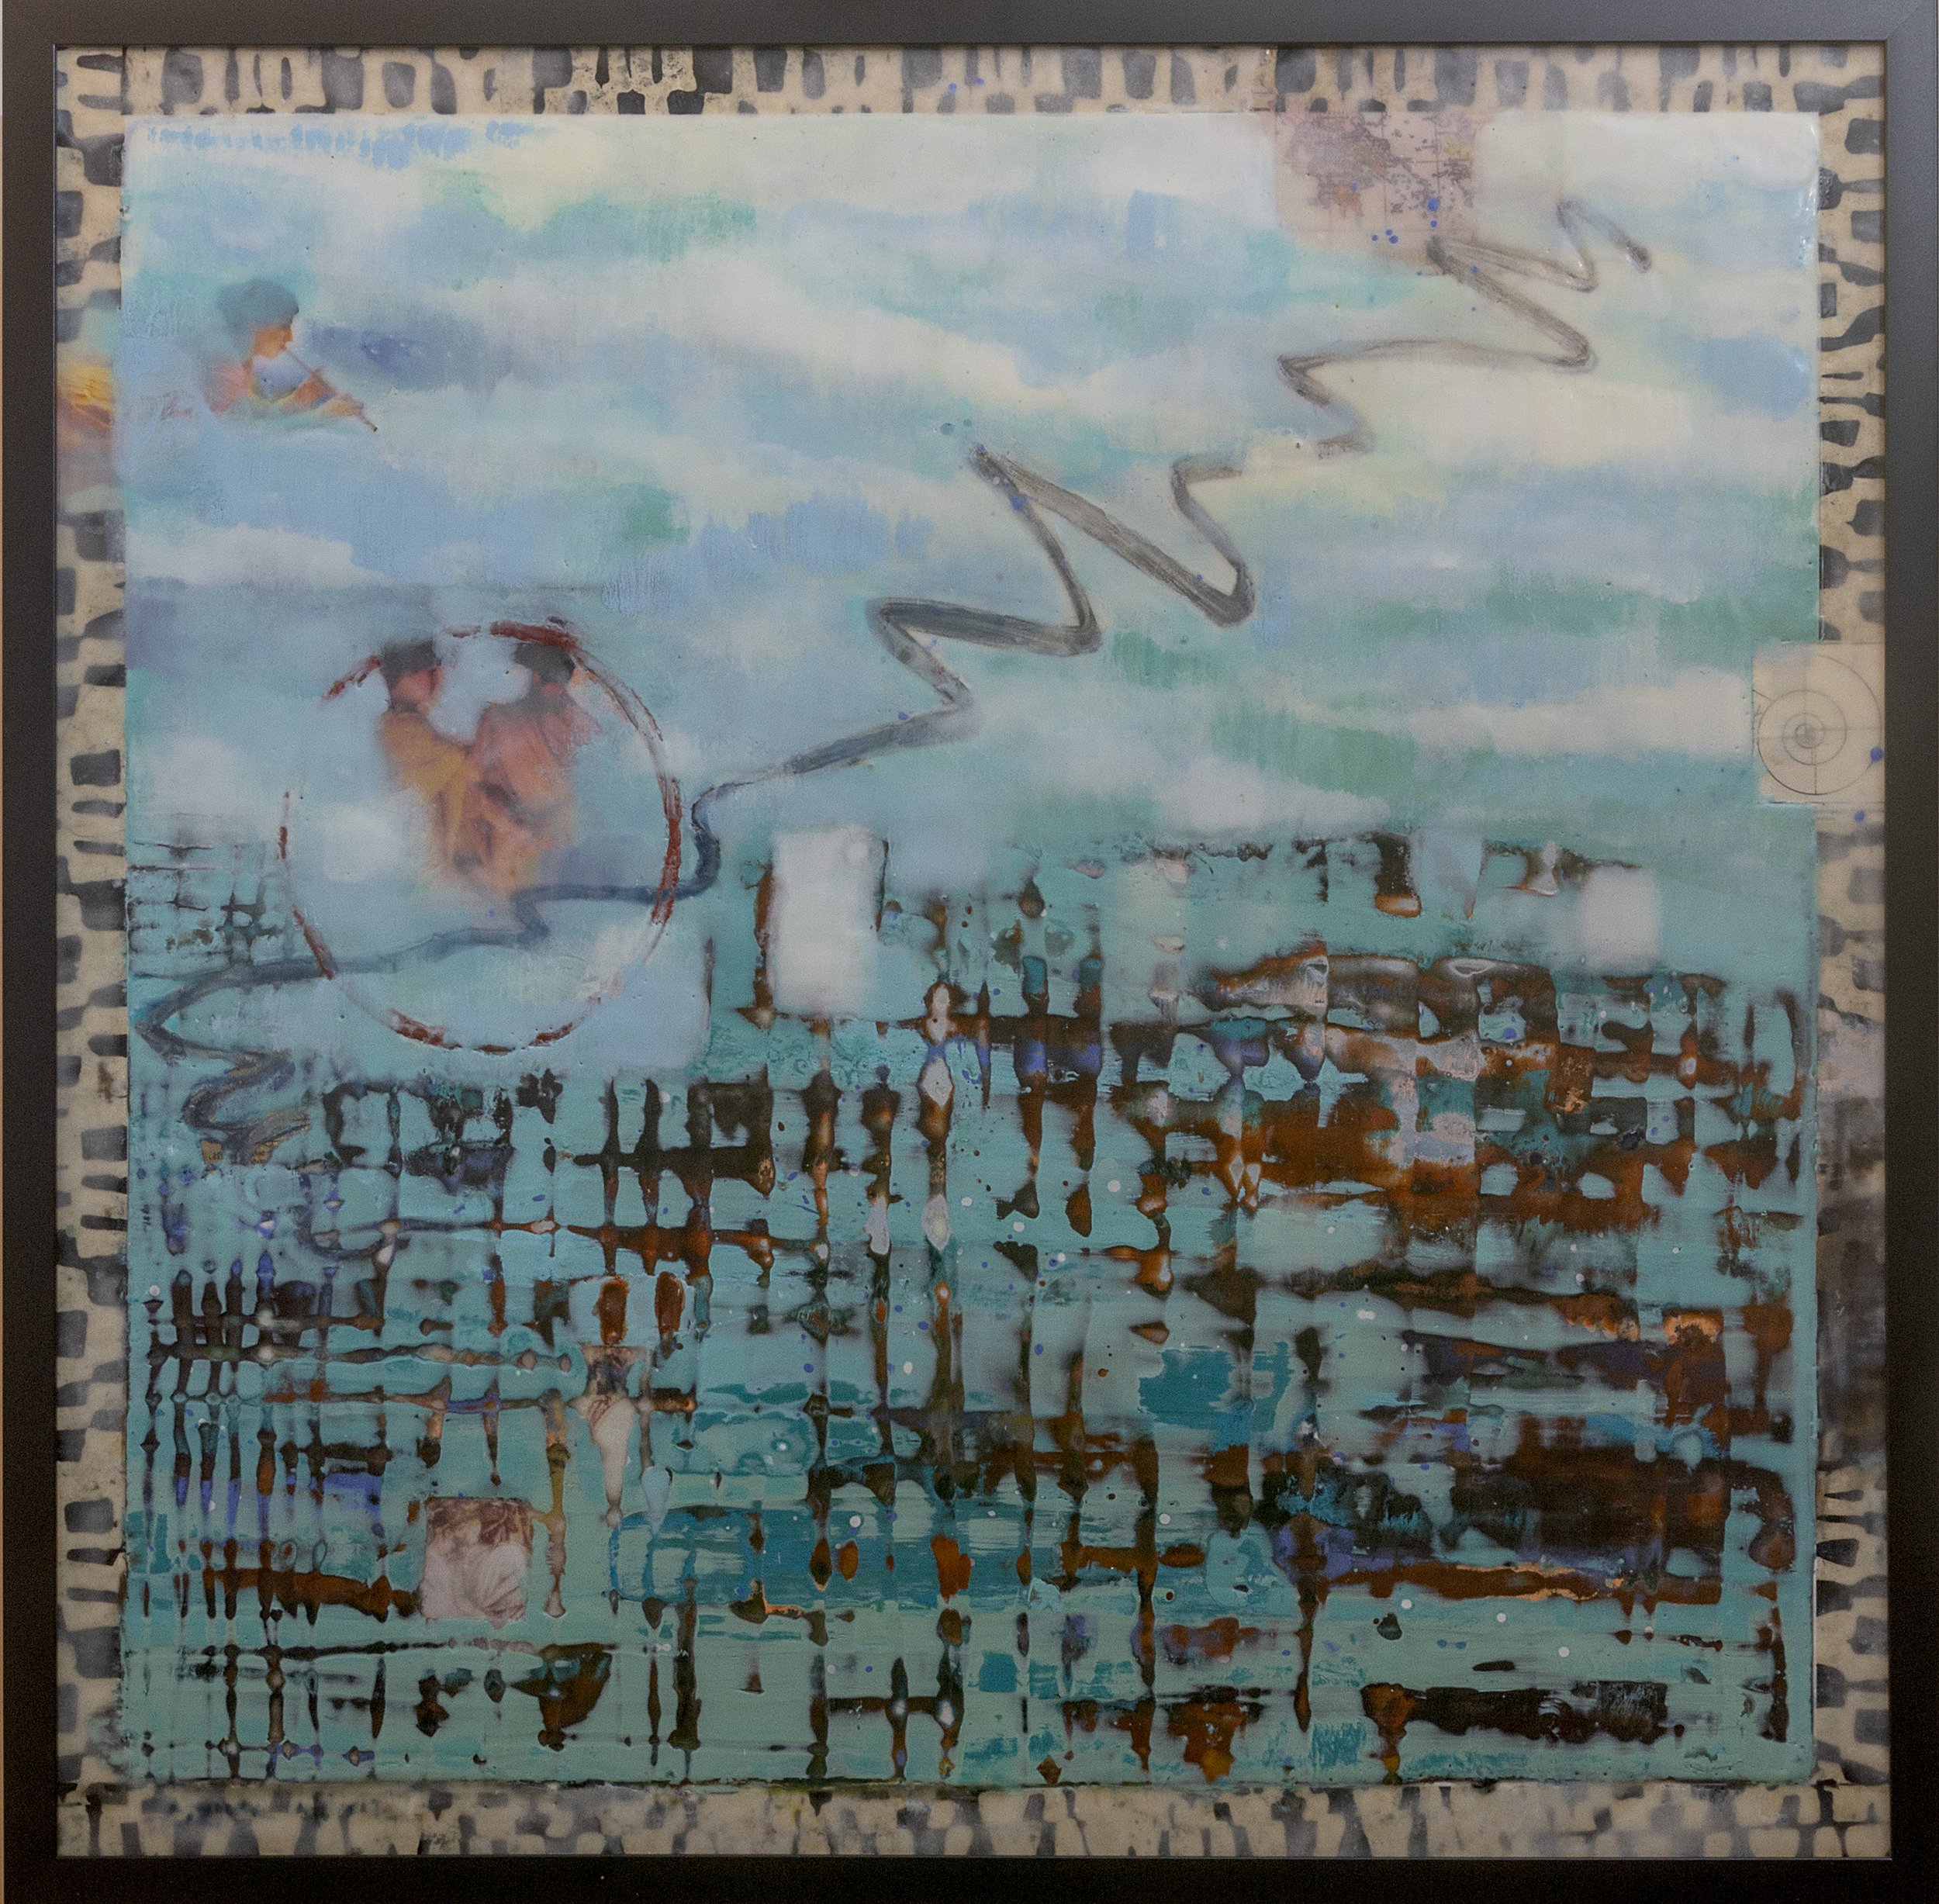   “In The Likely Event” (Daemon and Pythias), 30 x 30, 2500.00, sold    